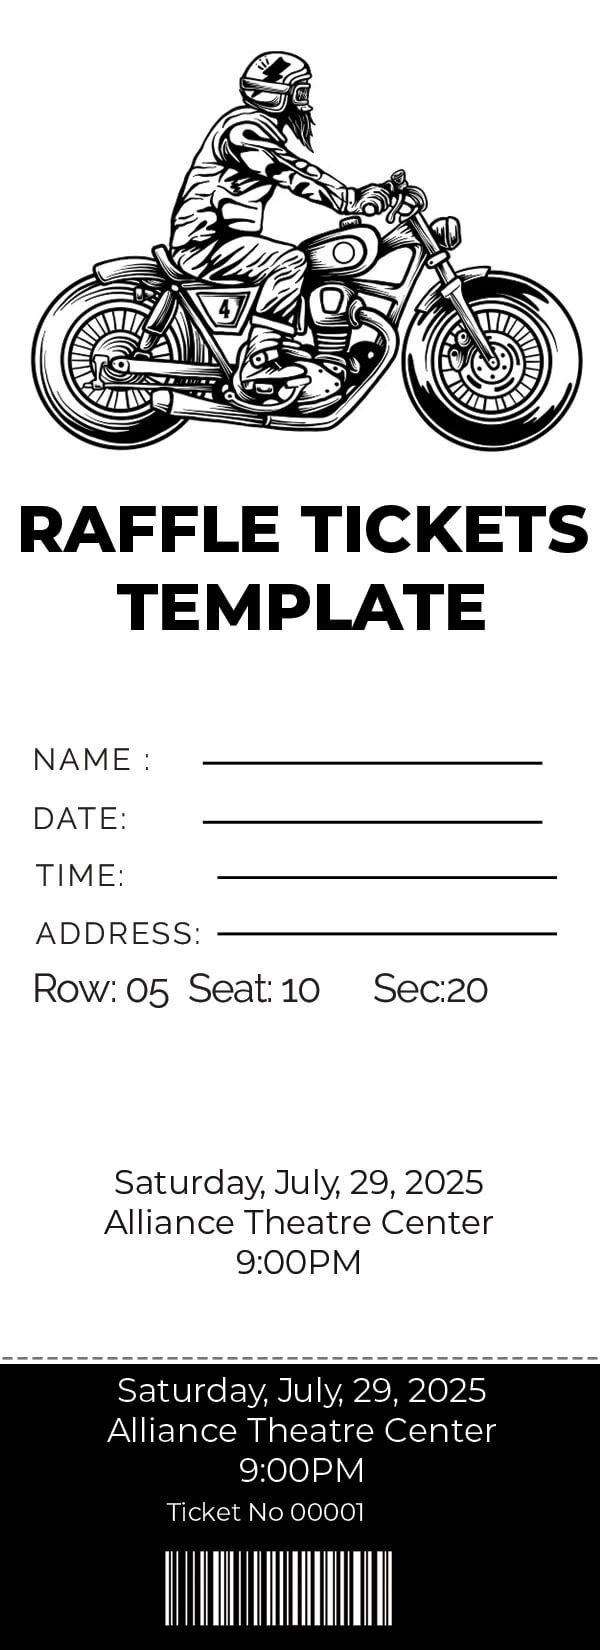 raffle tickets template Templates for Photoshop